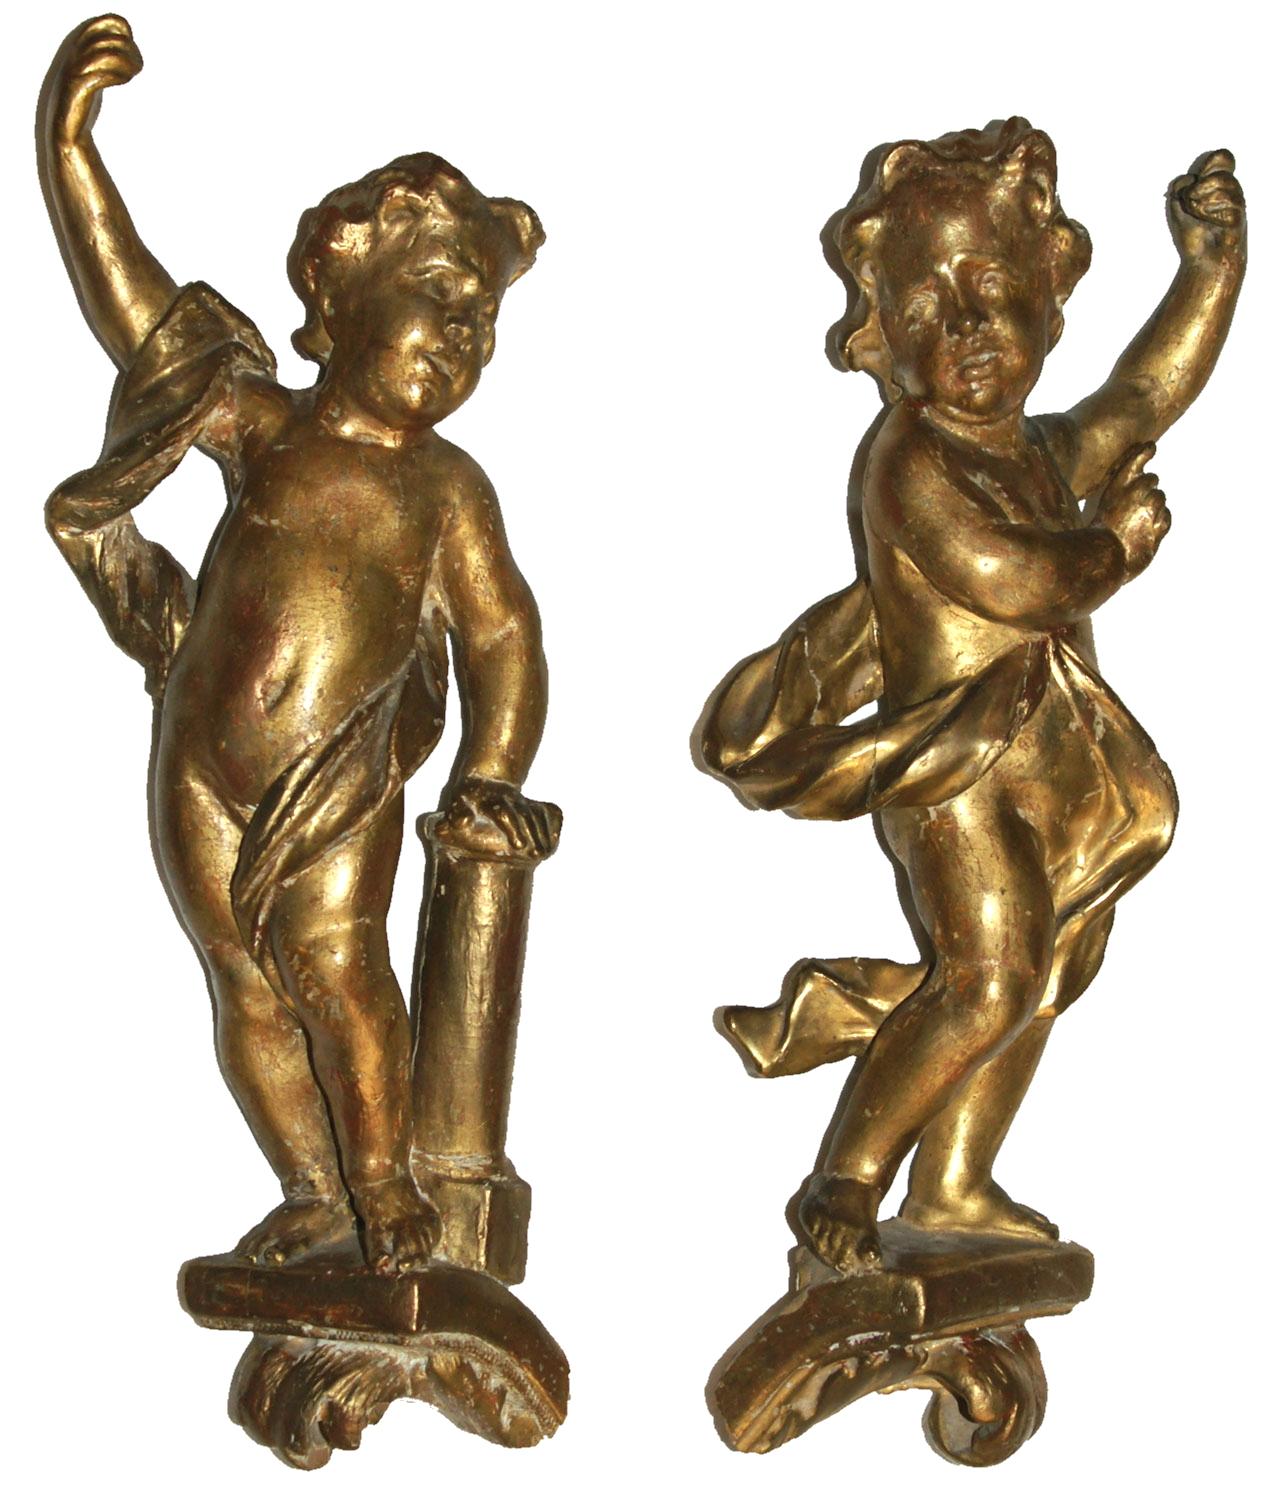 Pair of Baroque Angels in Gilt Wood, early 18 th century - Sculpture by Unknown